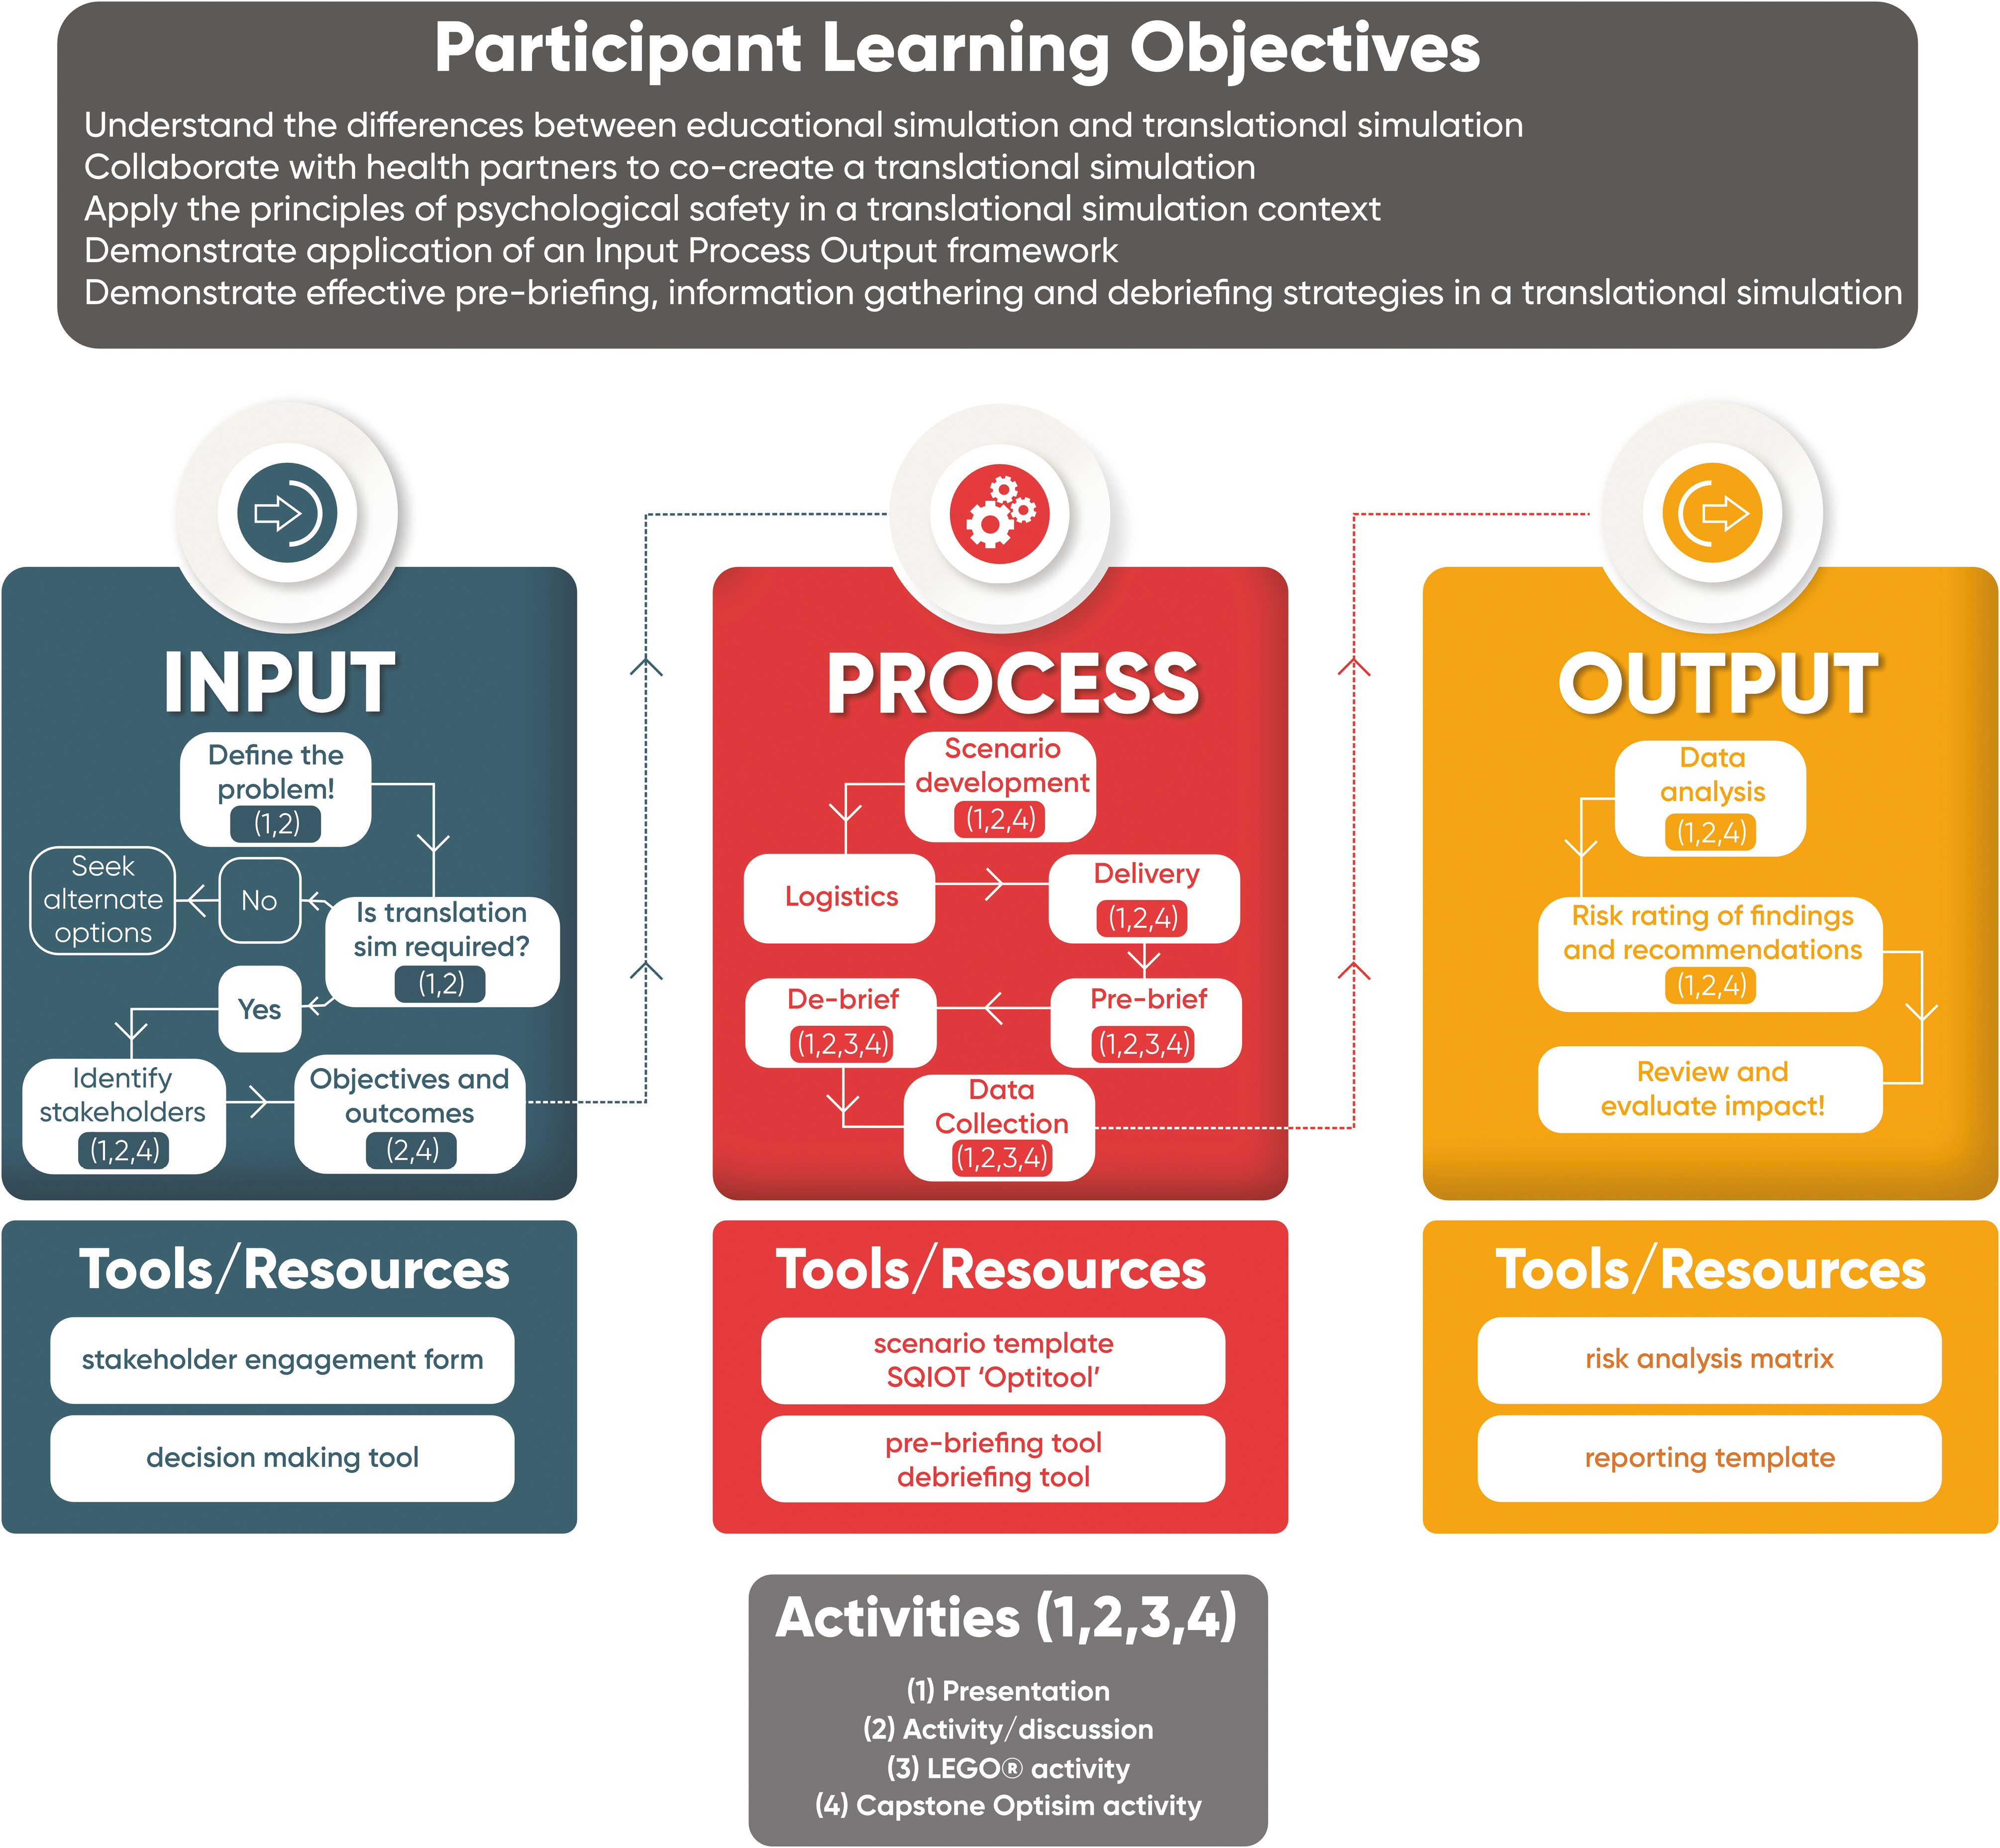 IPO framework with course objectives and activities to support content delivery. Tools and resources are provided Adapted from the original framework in Nickson et al. 2021 [1].